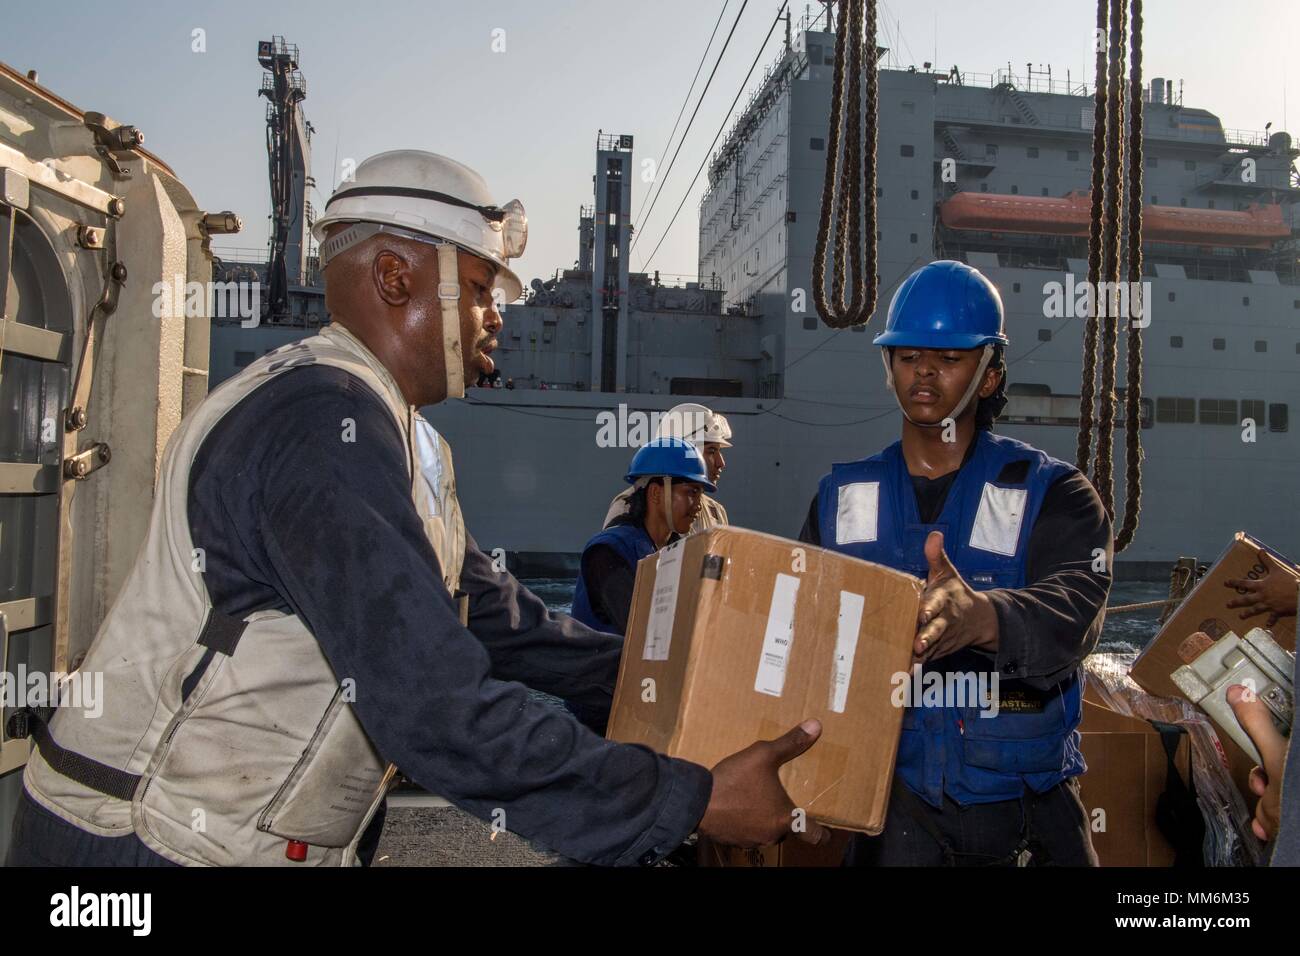 170907-N-VR594-0175 ARABIAN GULF (Sept. 7, 2017) Sailors unload supplies aboard the Ticonderoga-class guided-missile cruiser USS Princeton (CG 59) during a connected replenishment with the dry cargo and ammunition ship USNS Alan Shepard (T-AKE 3). Princeton is deployed in the U.S. 5th Fleet area of operations in support of maritime security operations designed to reassure allies and partners, and preserve the freedom of navigation and the free flow of commerce in the region. (U.S. Navy photo by Mass Communication Specialist 3rd Class Kelsey J. Hockenberger/Released) Stock Photo